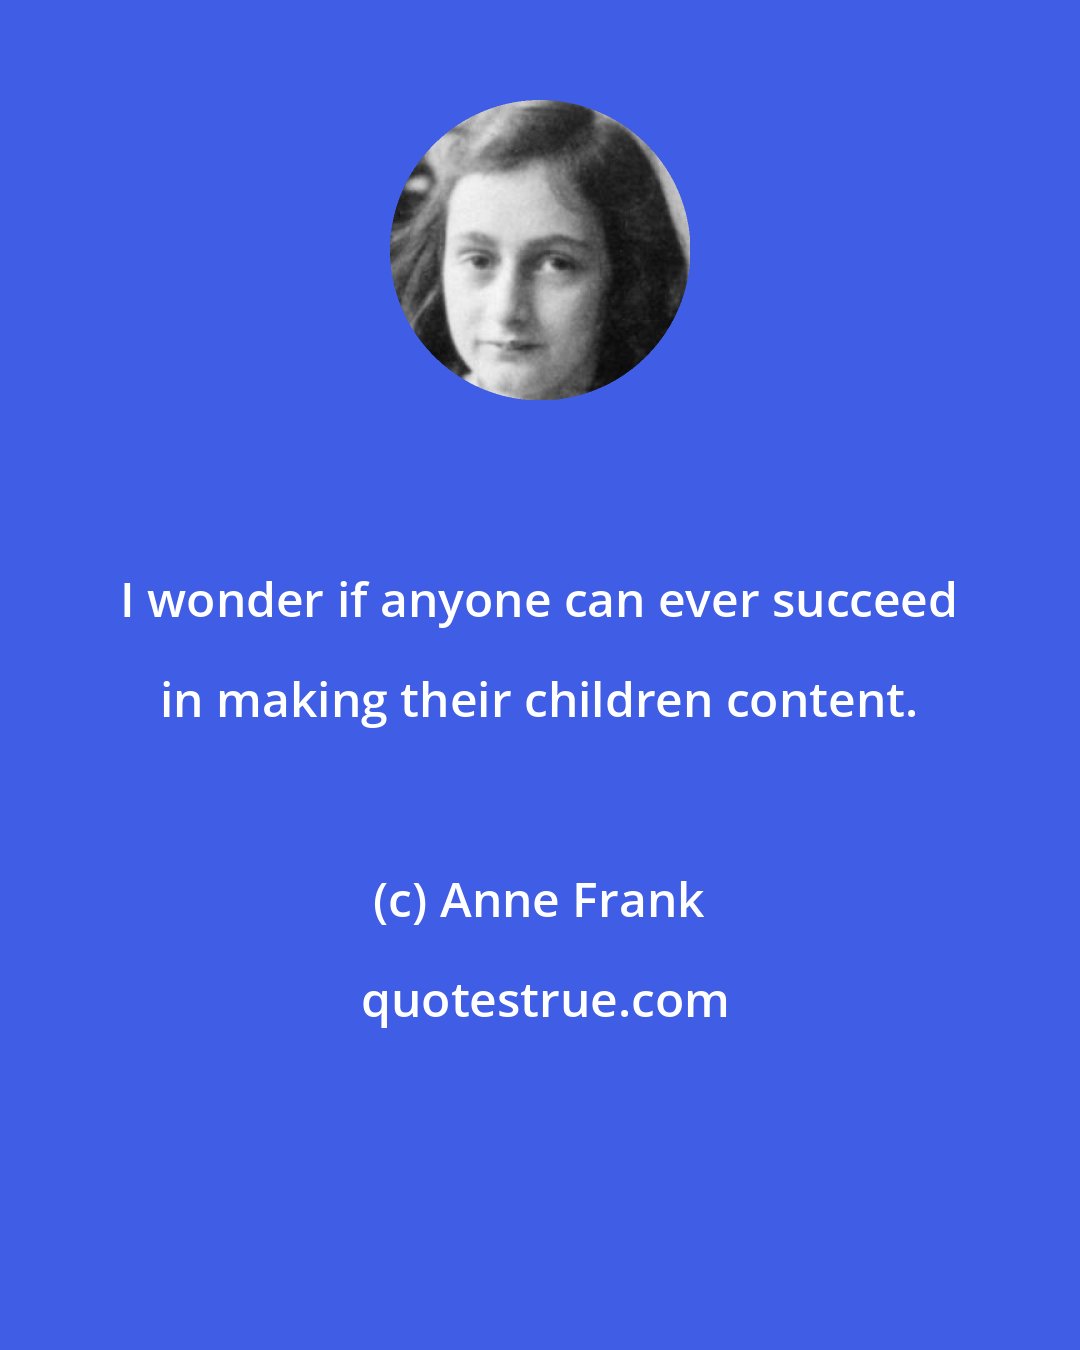 Anne Frank: I wonder if anyone can ever succeed in making their children content.